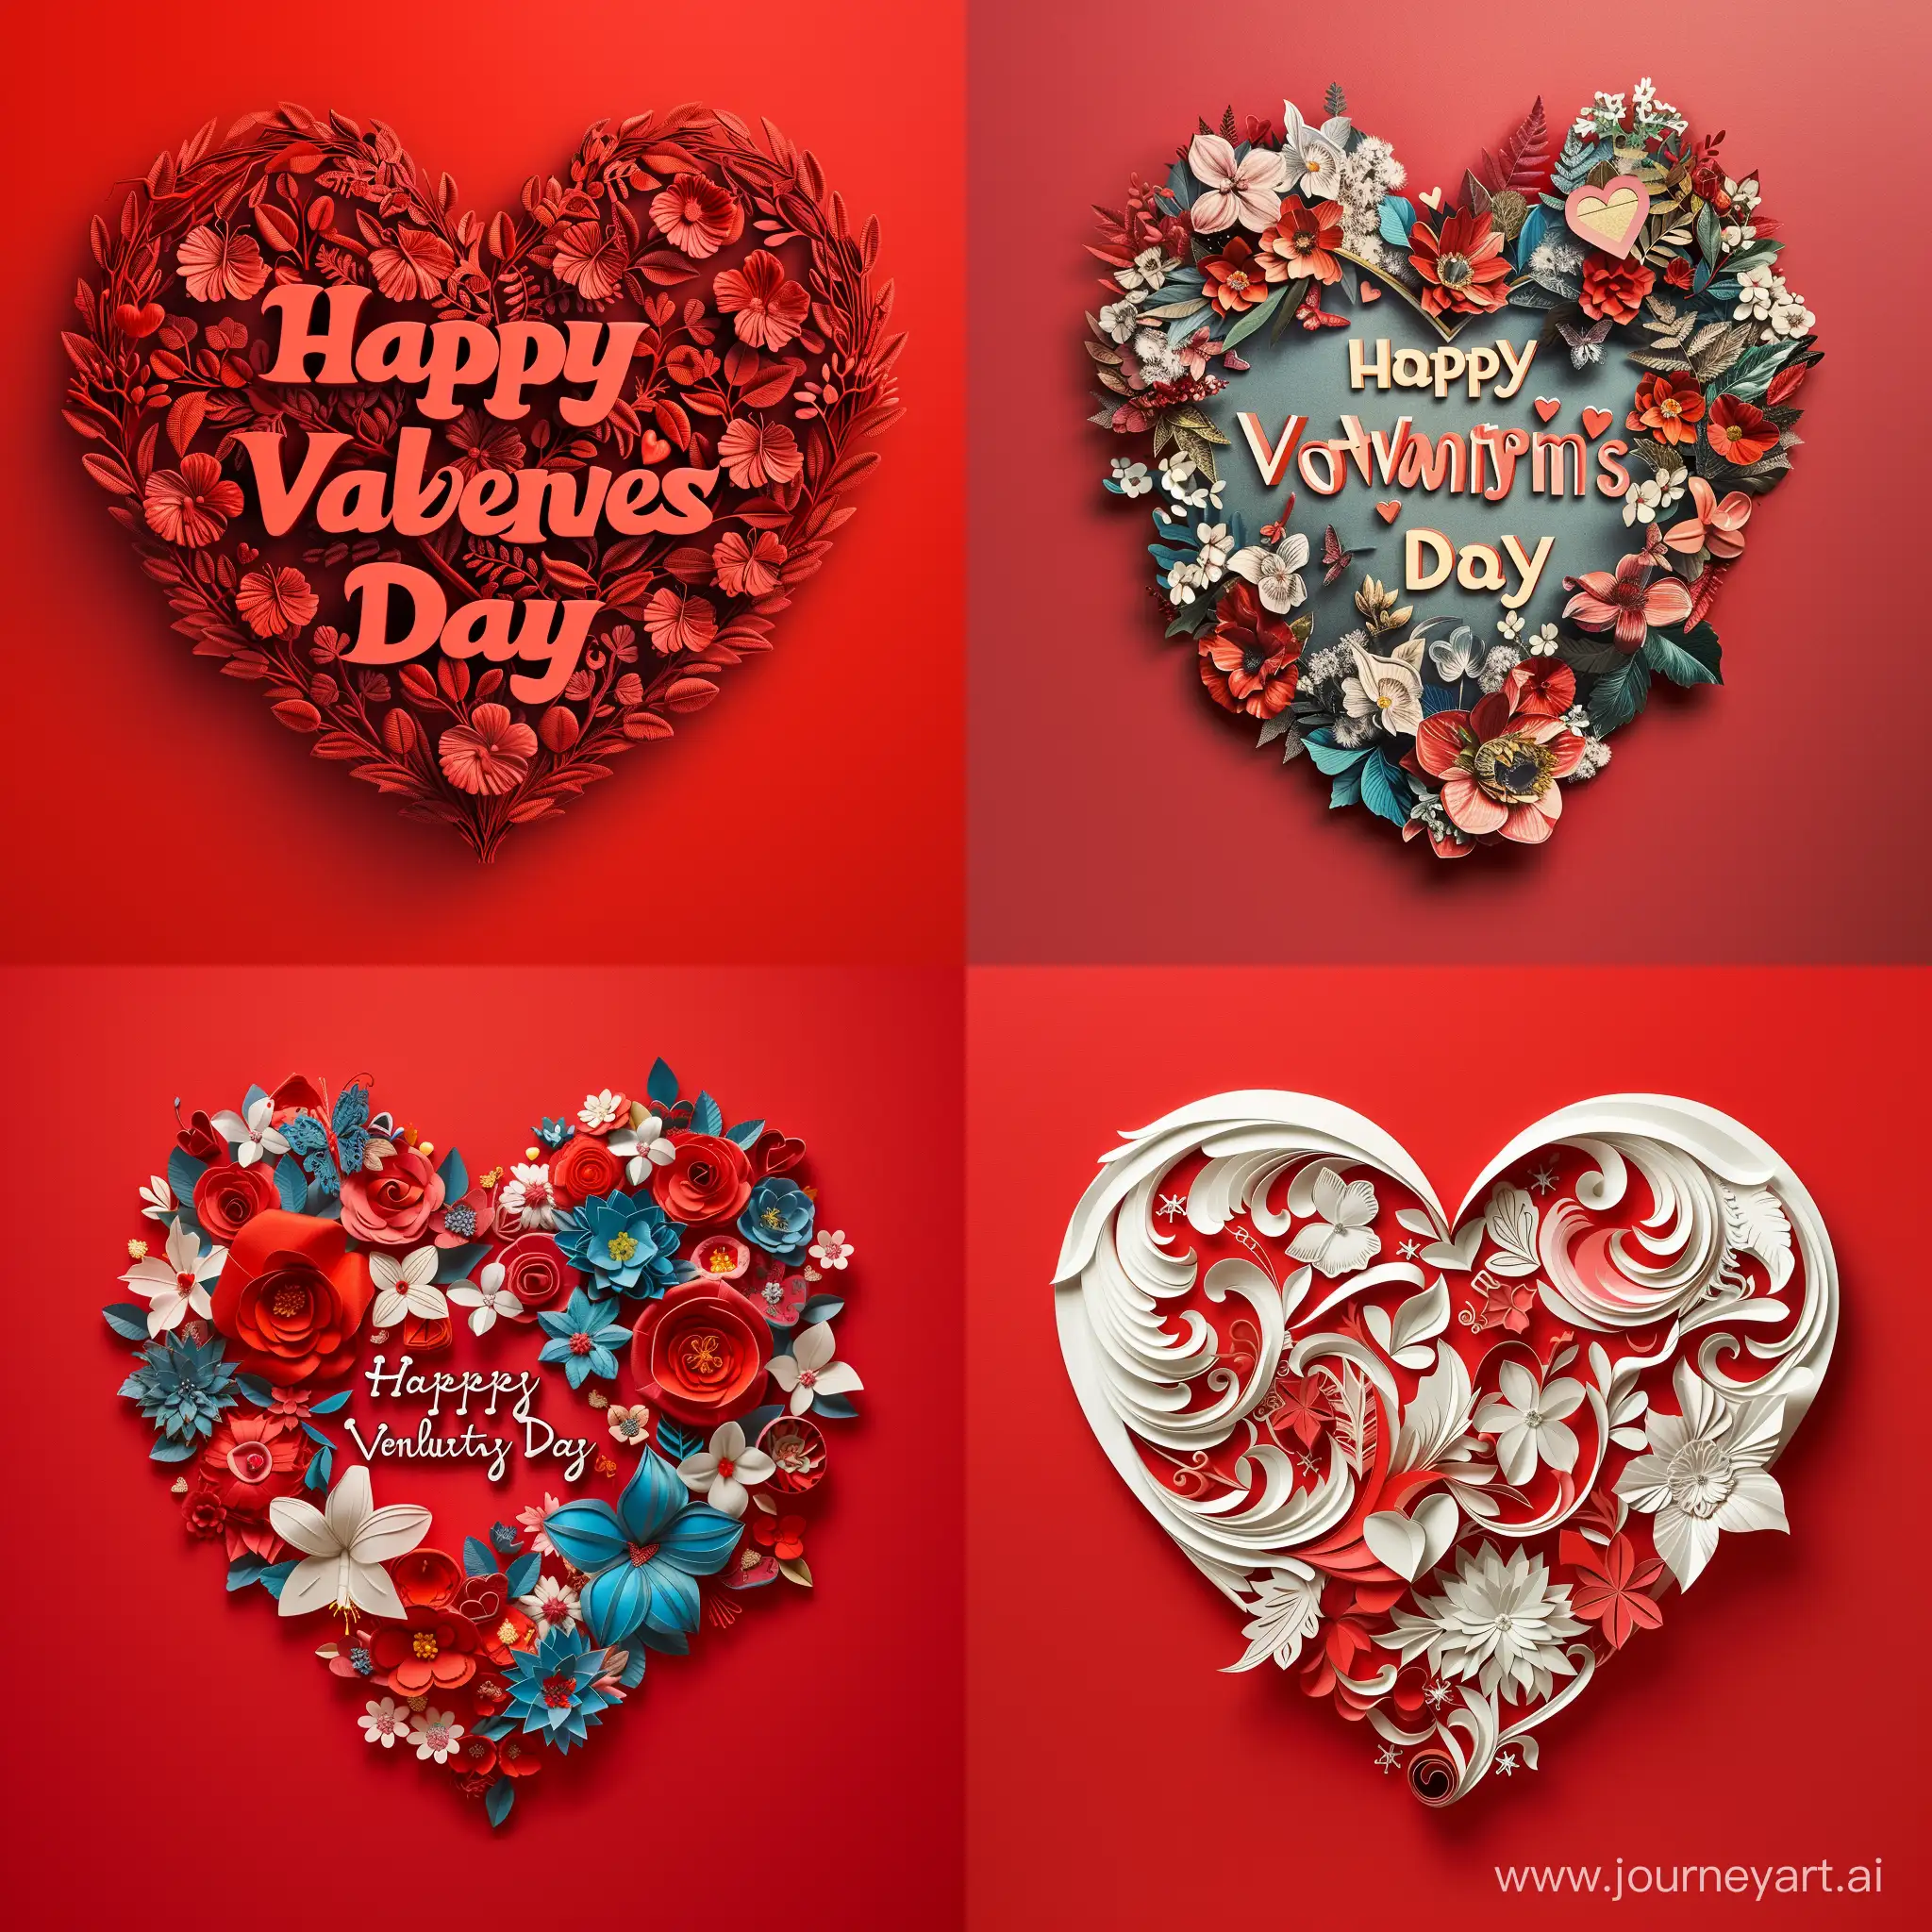 here's a high-detail prompt for "Happy Valentine's Day" on a red background: